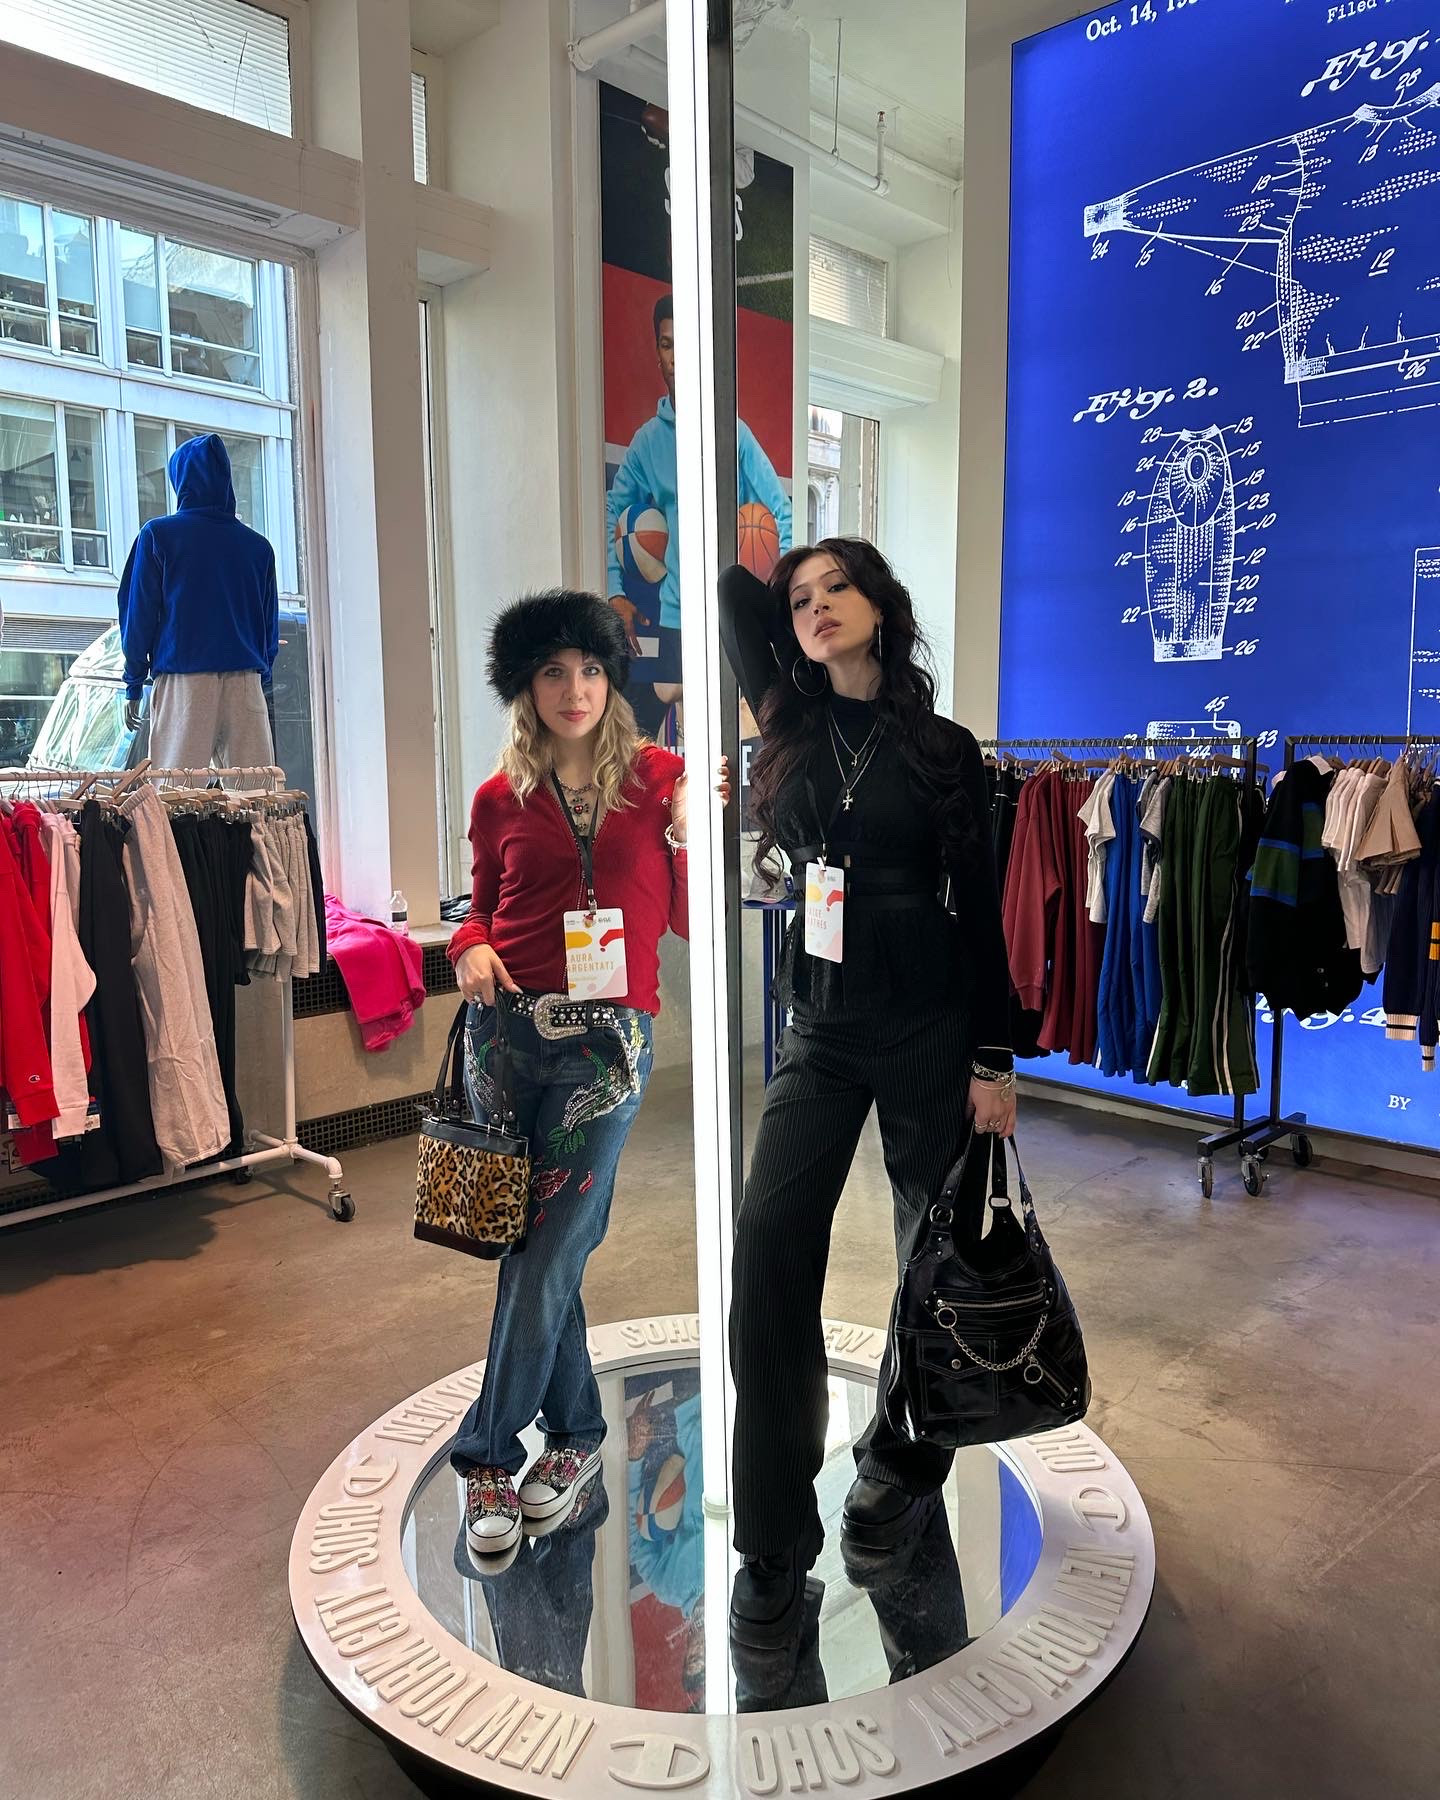 Argentati stands next to another student inside a clothing store.